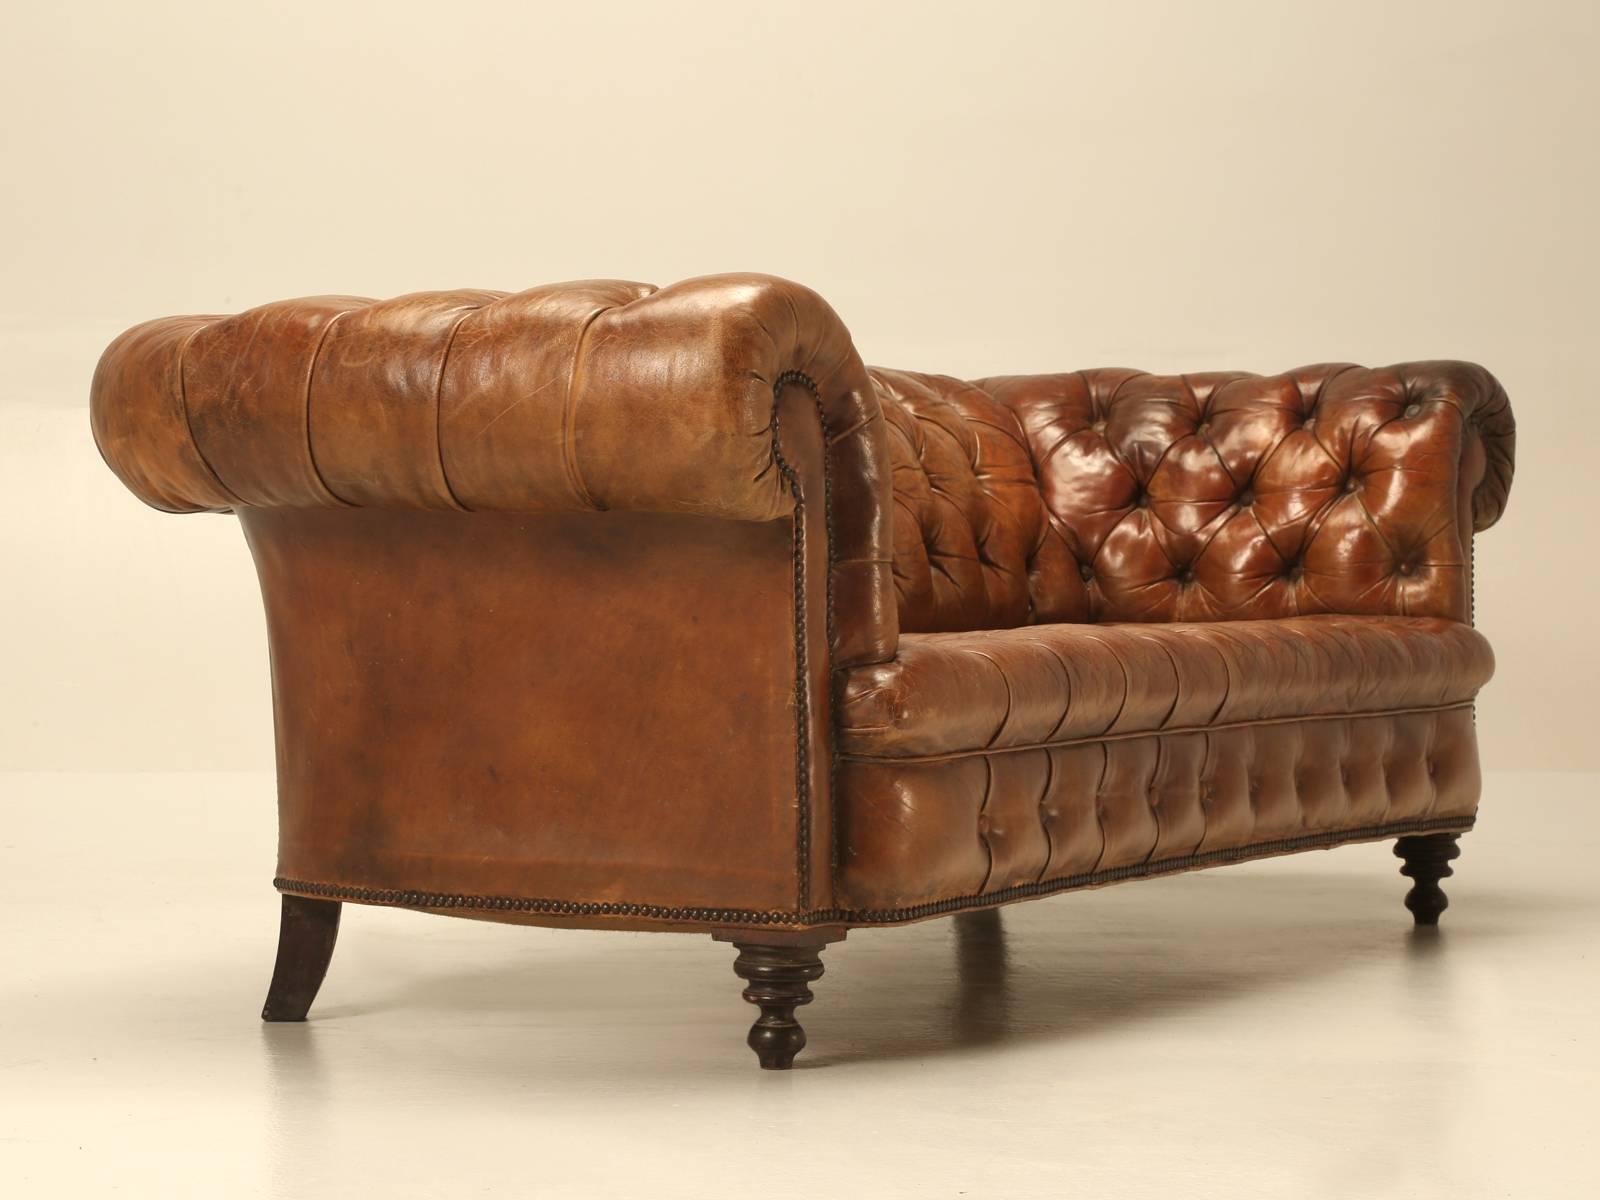 Late 19th Century Antique Leather Chesterfield Sofa in Original Leather